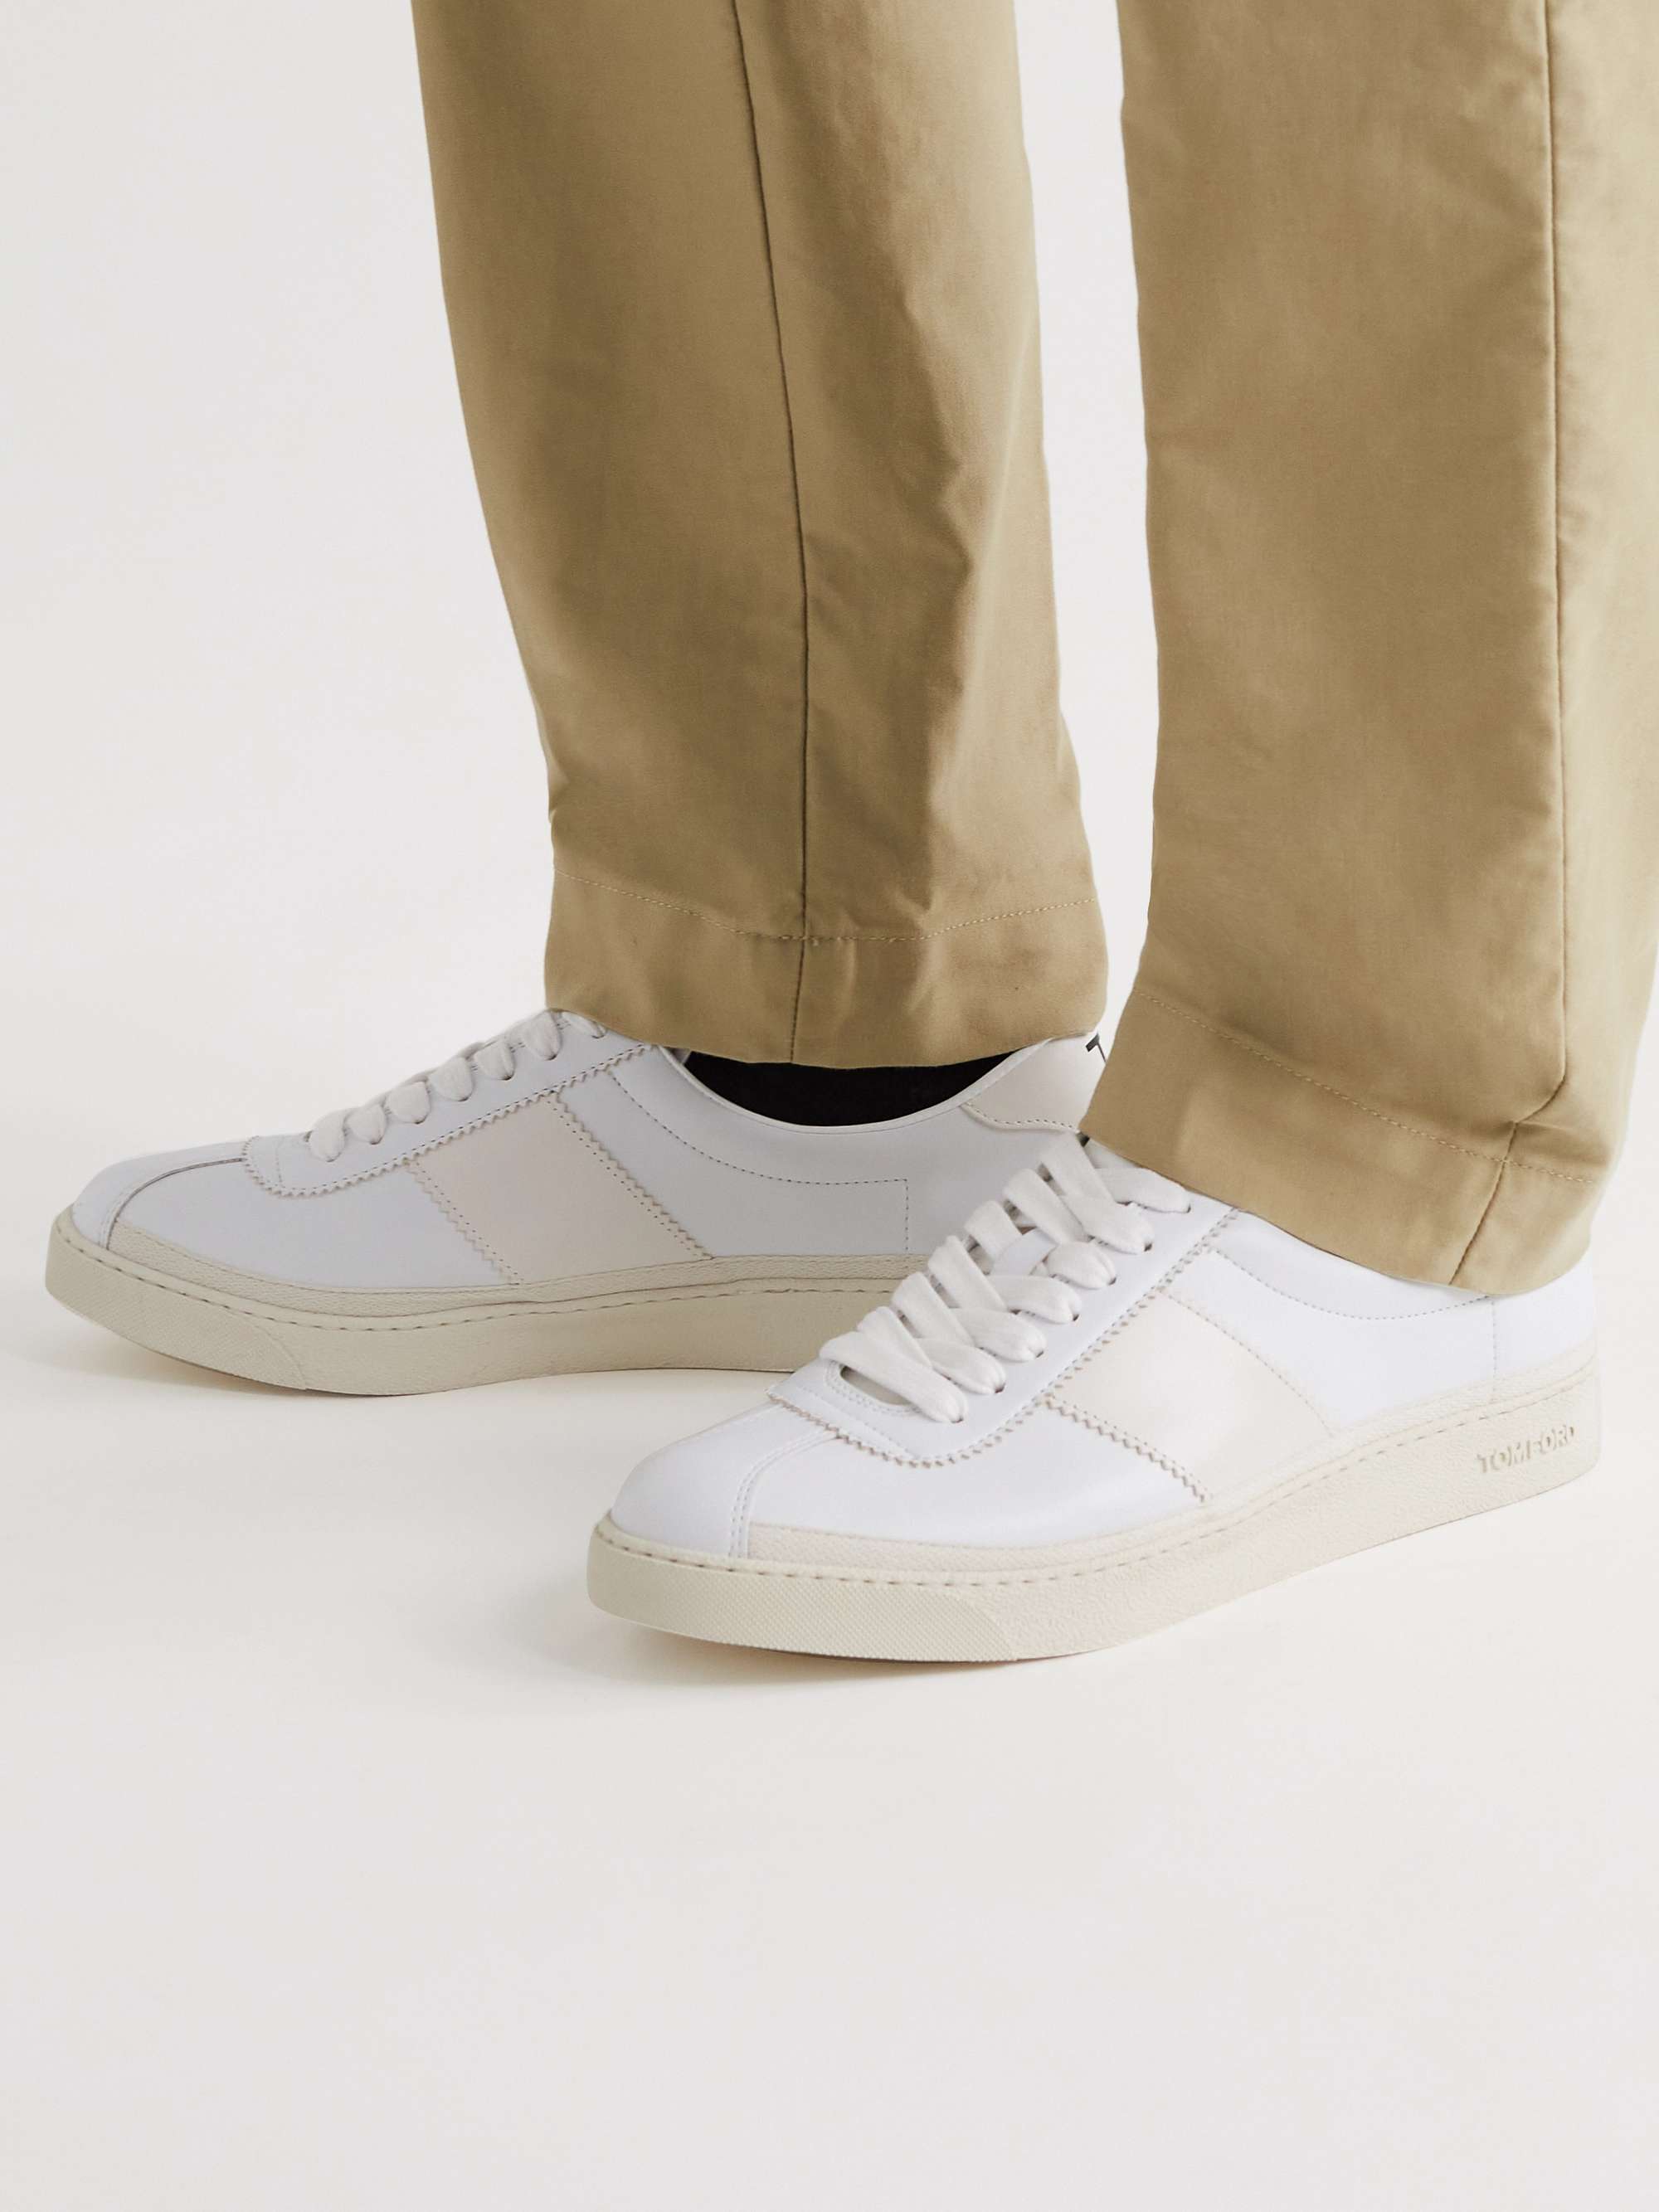 TOM FORD Bannister Panelled Faux Leather Sneakers